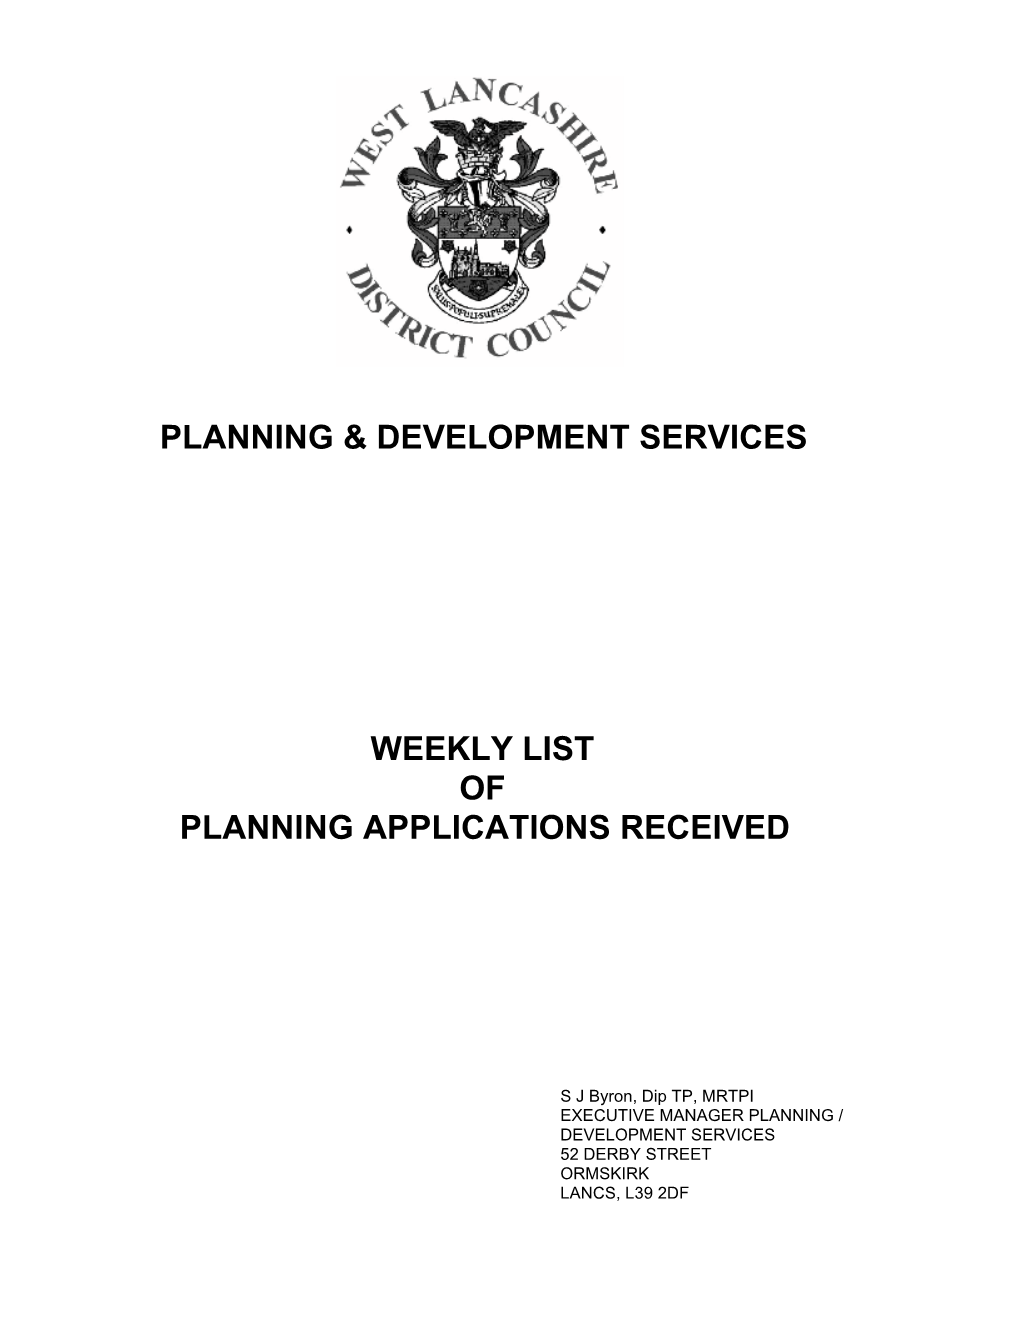 Planning & Development Services Weekly List Of